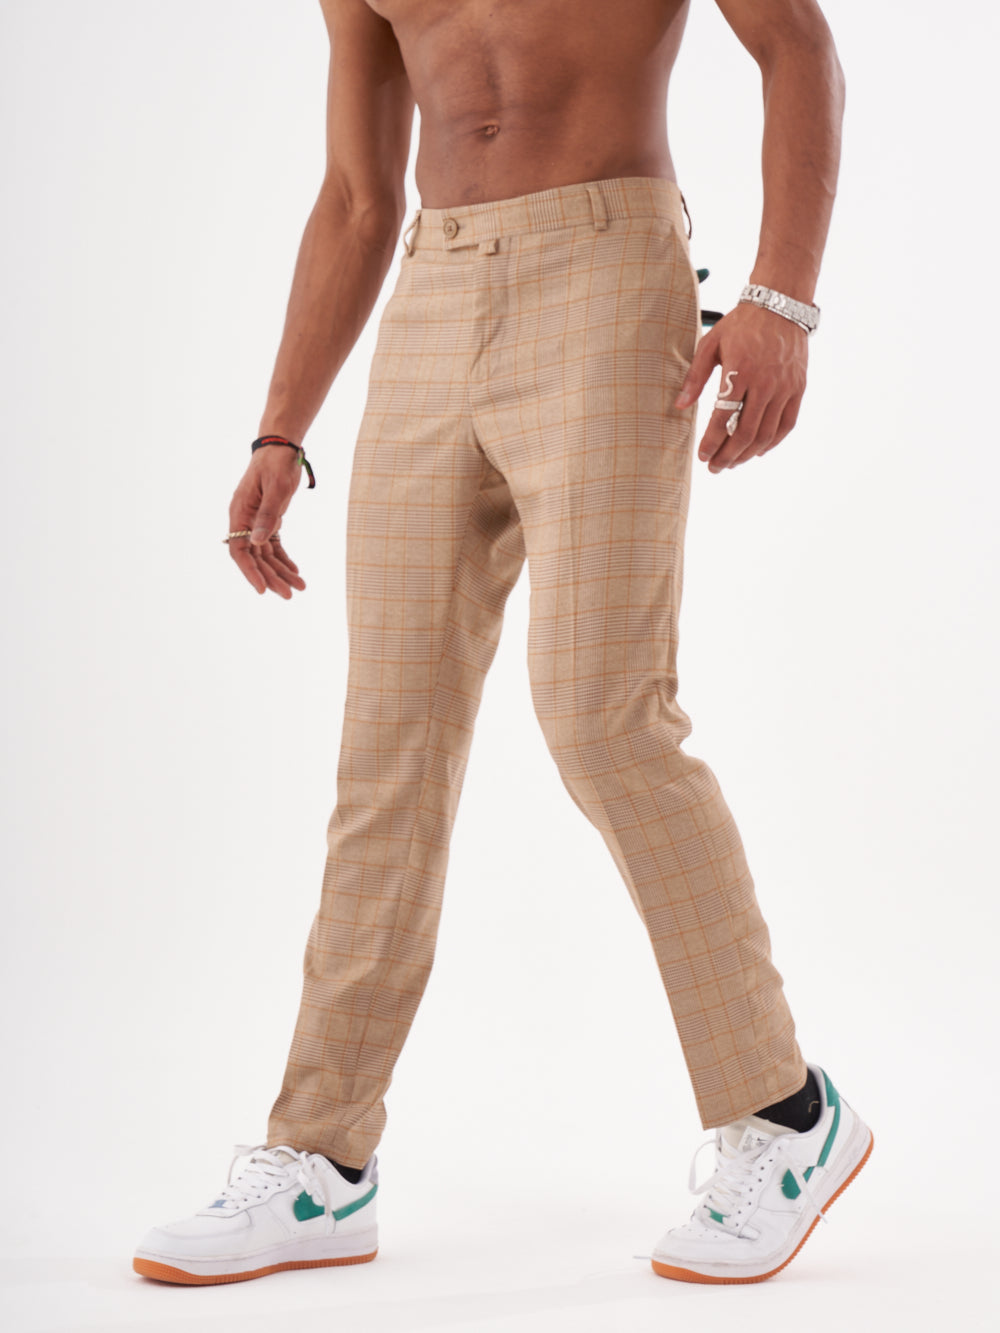 A man in a pair of Barot pants posing for a photo.